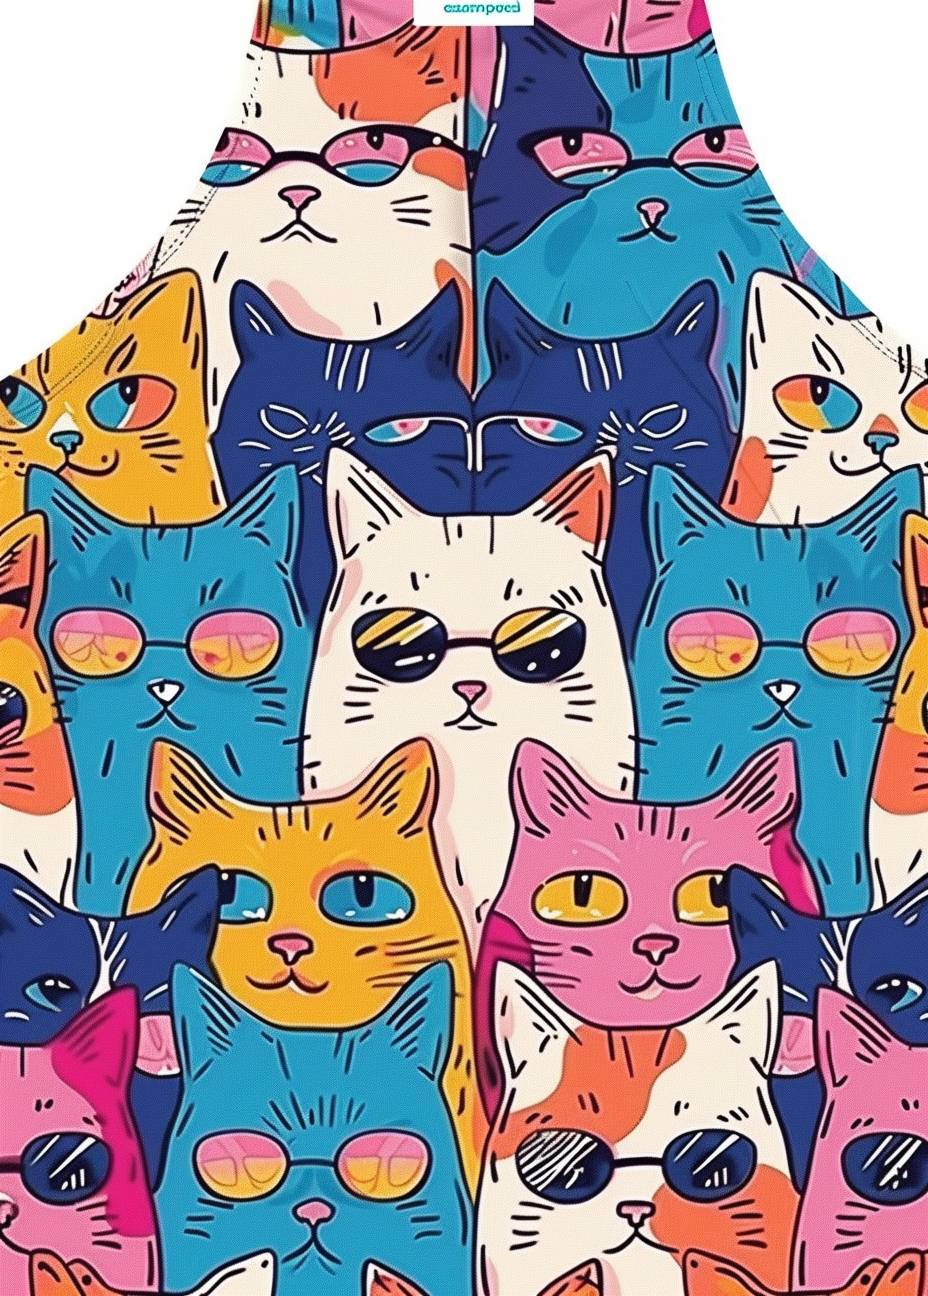 A pattern of colorful cartoon cats with different expressions and colors, such as pink or blue, wearing sunglasses on their heads.